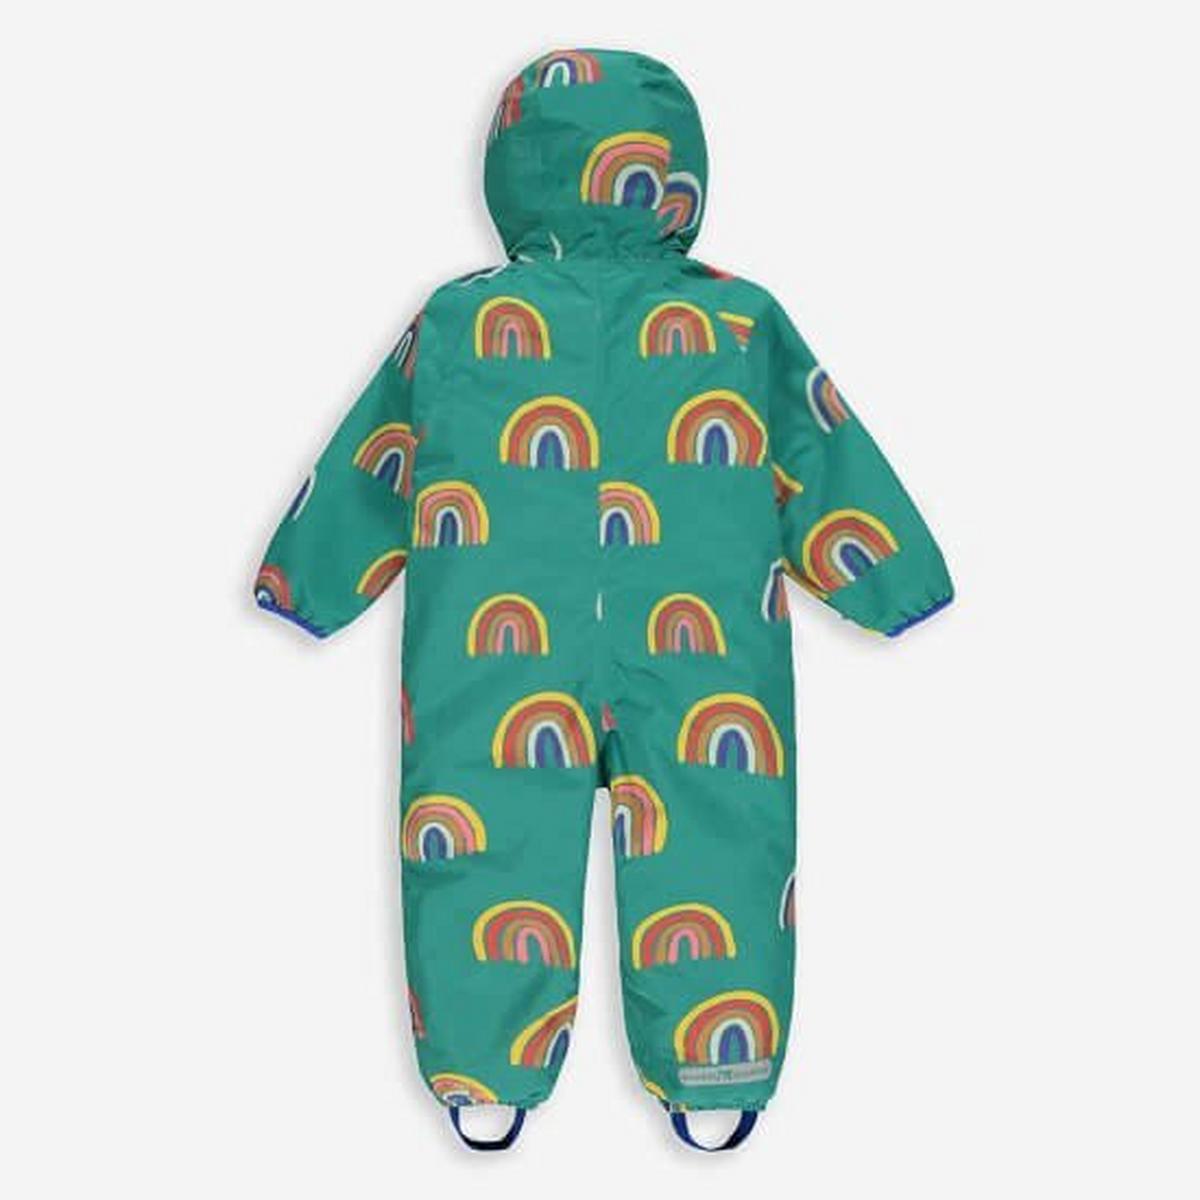 Muddy Puddles Kids EcoLight Puddle Suit - Green Rainbow